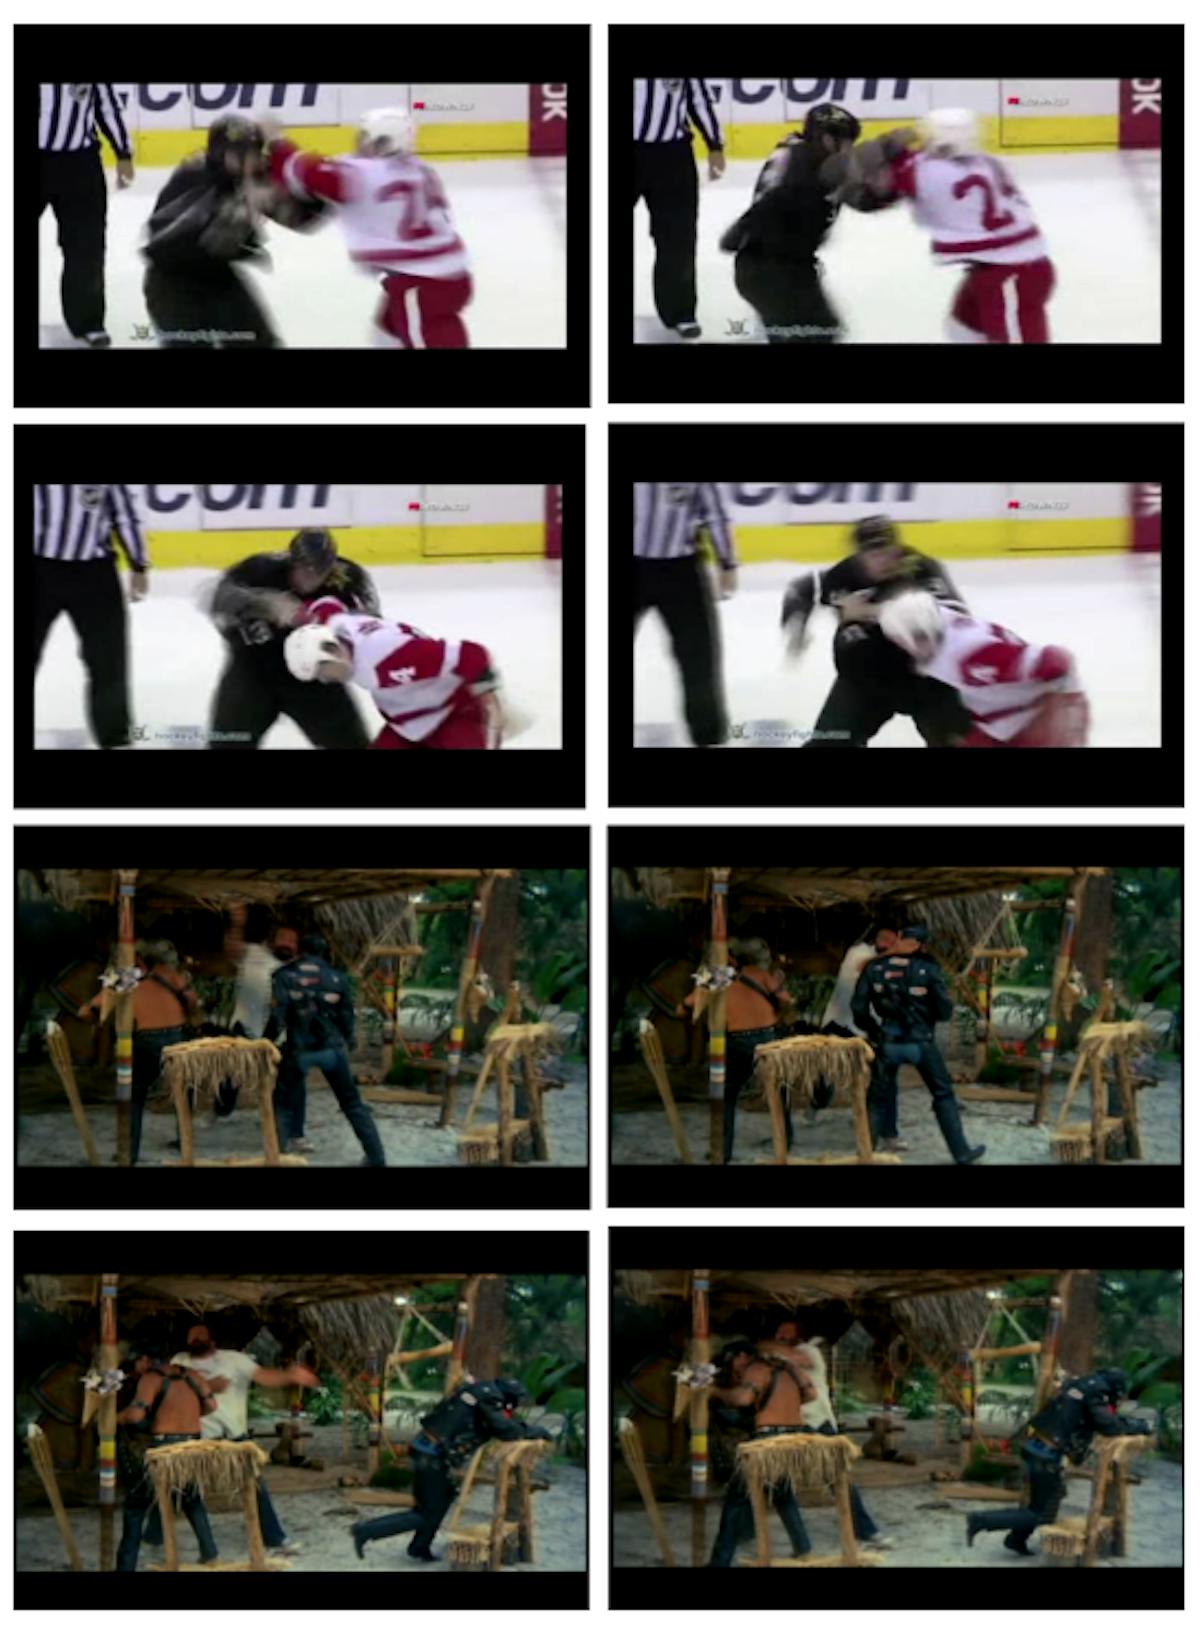 Figure 4.1: Sample frames from the fight videos in the Hockey (top) and action movie (bottom) datasets.